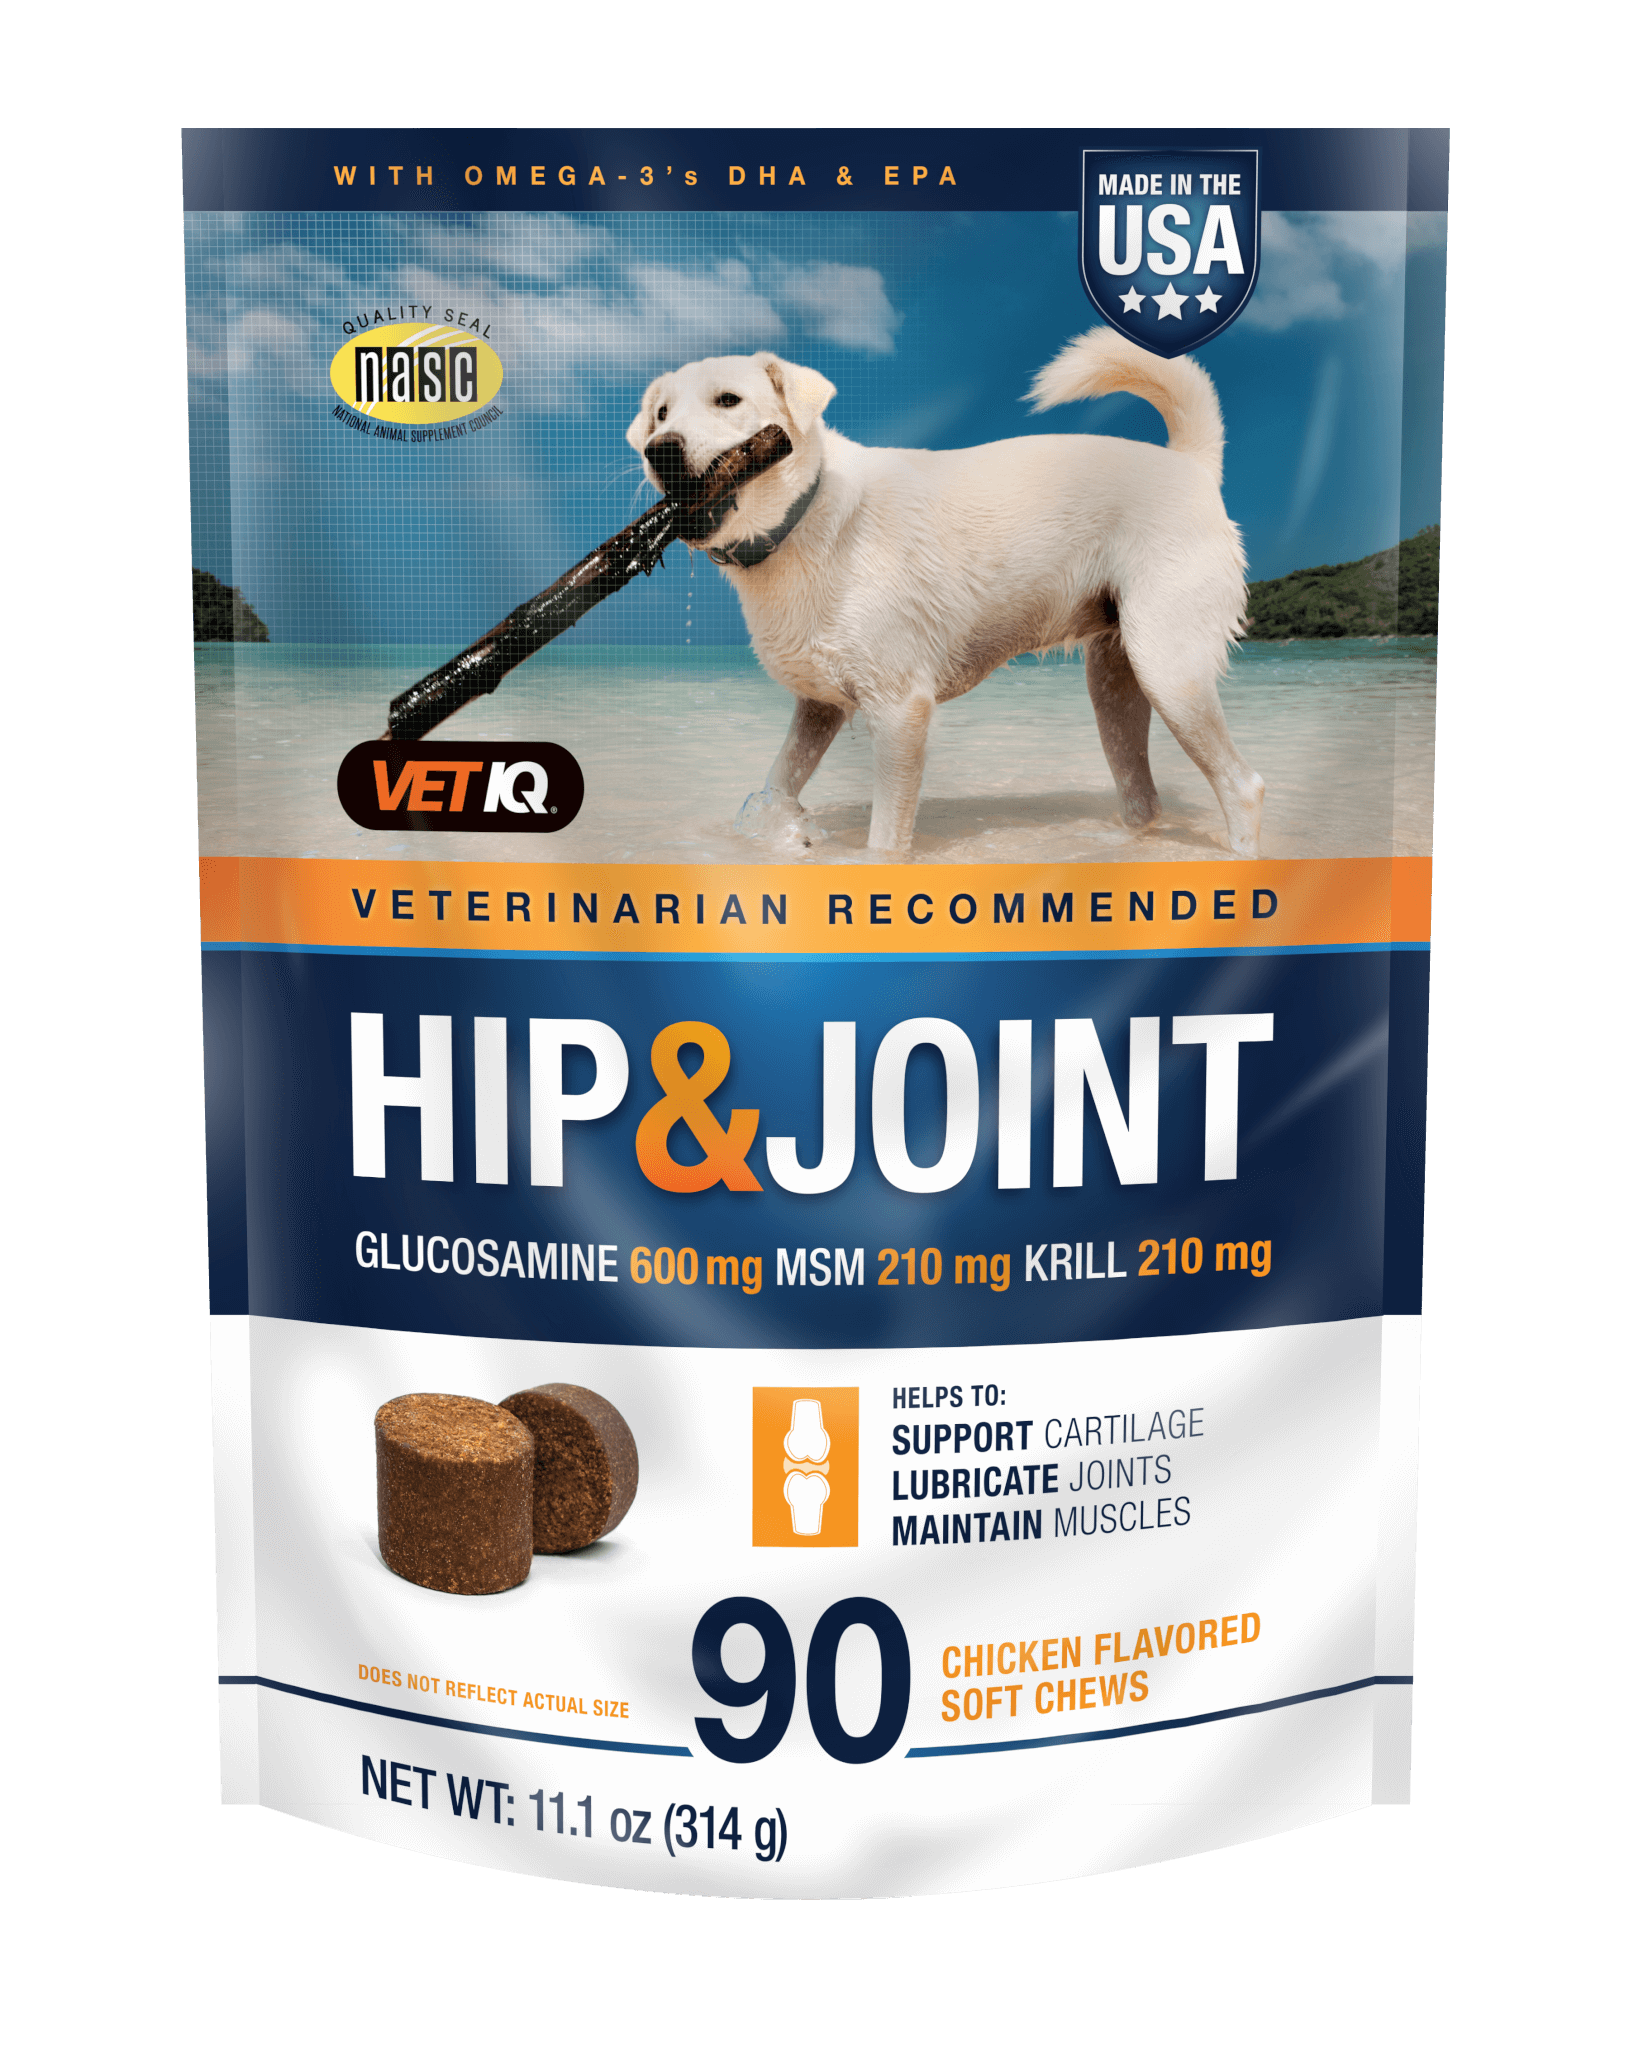 can puppies have joint supplements